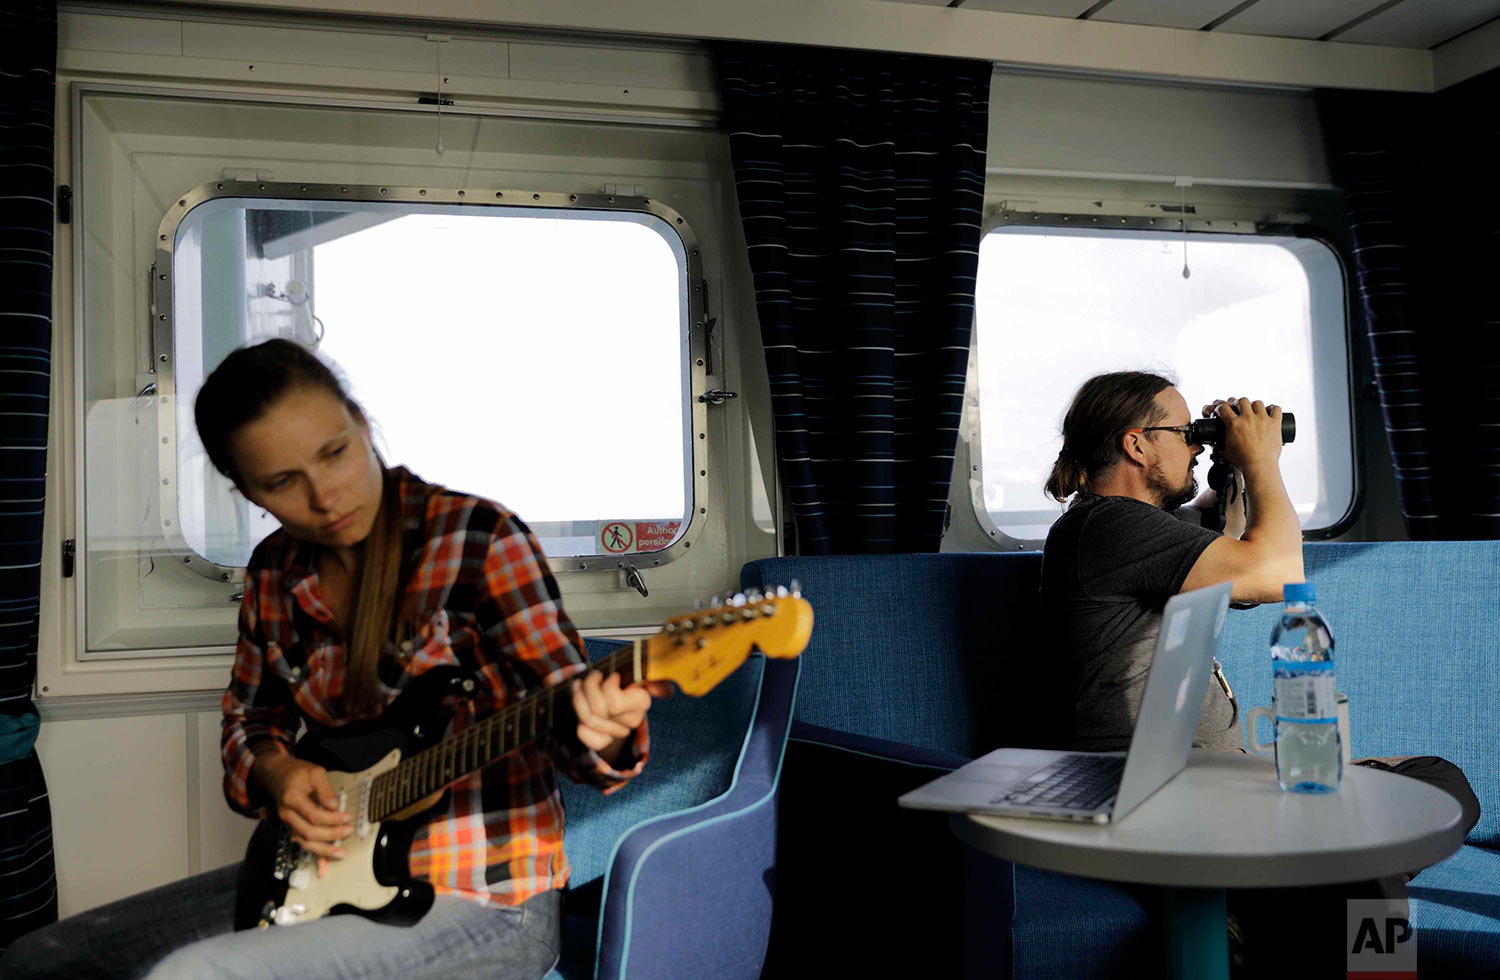  In this Friday, July 7, 2017 photo, researcher Daria Gritsenko, left, plays "Hotel California" on the guitar as fellow researcher Ari Laakso, right, looks from aboard the Finnish icebreaker MSV Nordica as it sails the North Pacific Ocean to traverse